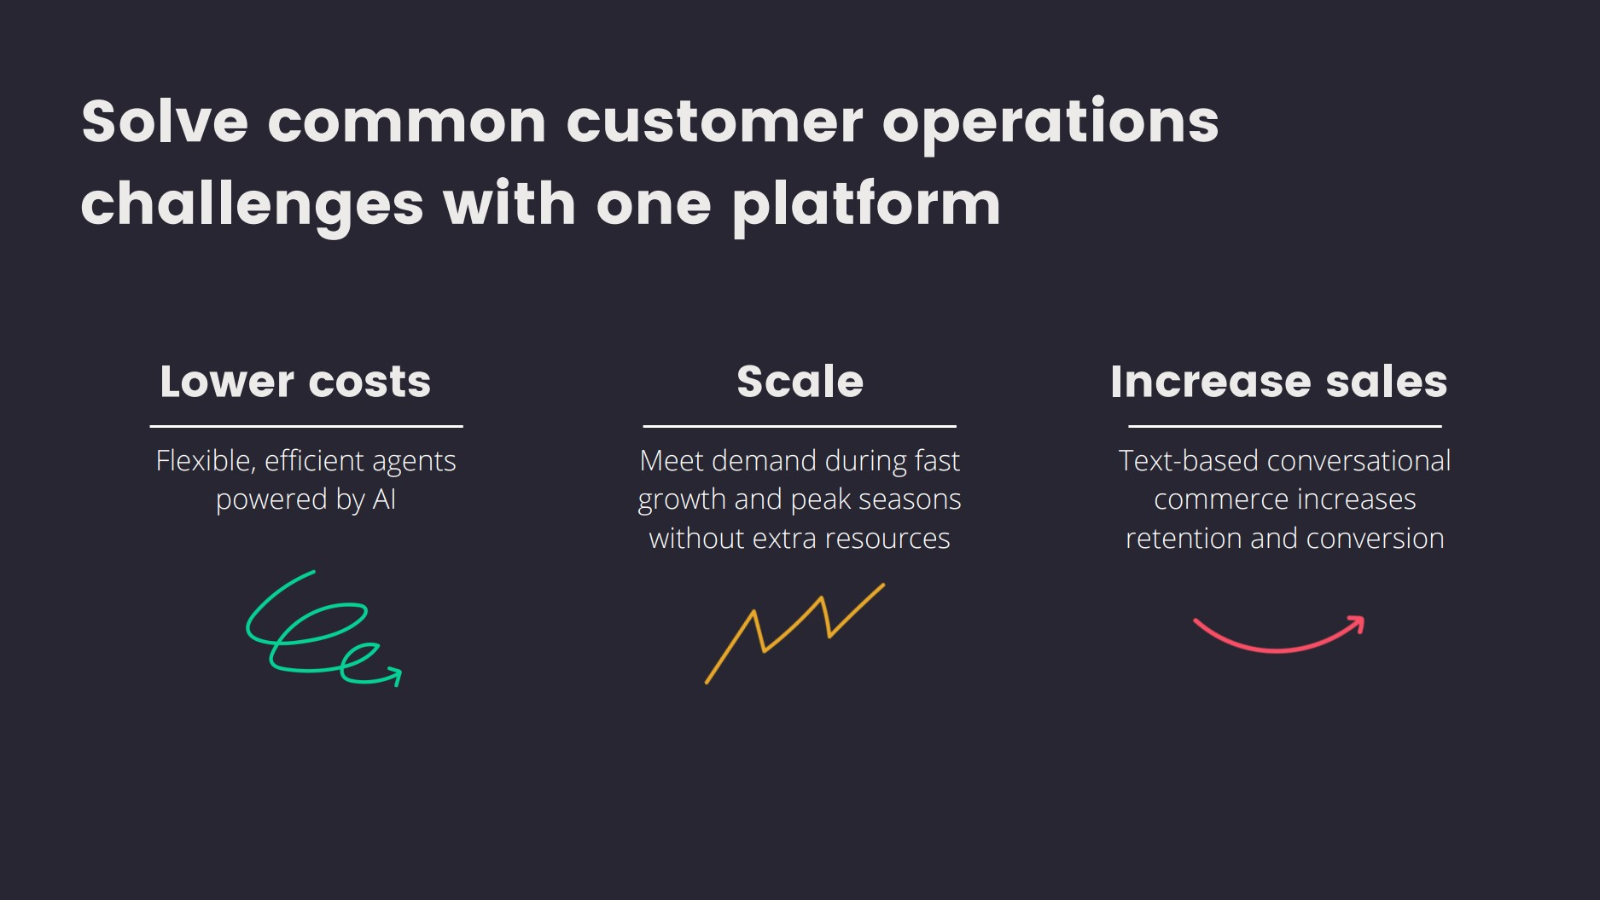 Solve common customer operations challenges with one platform